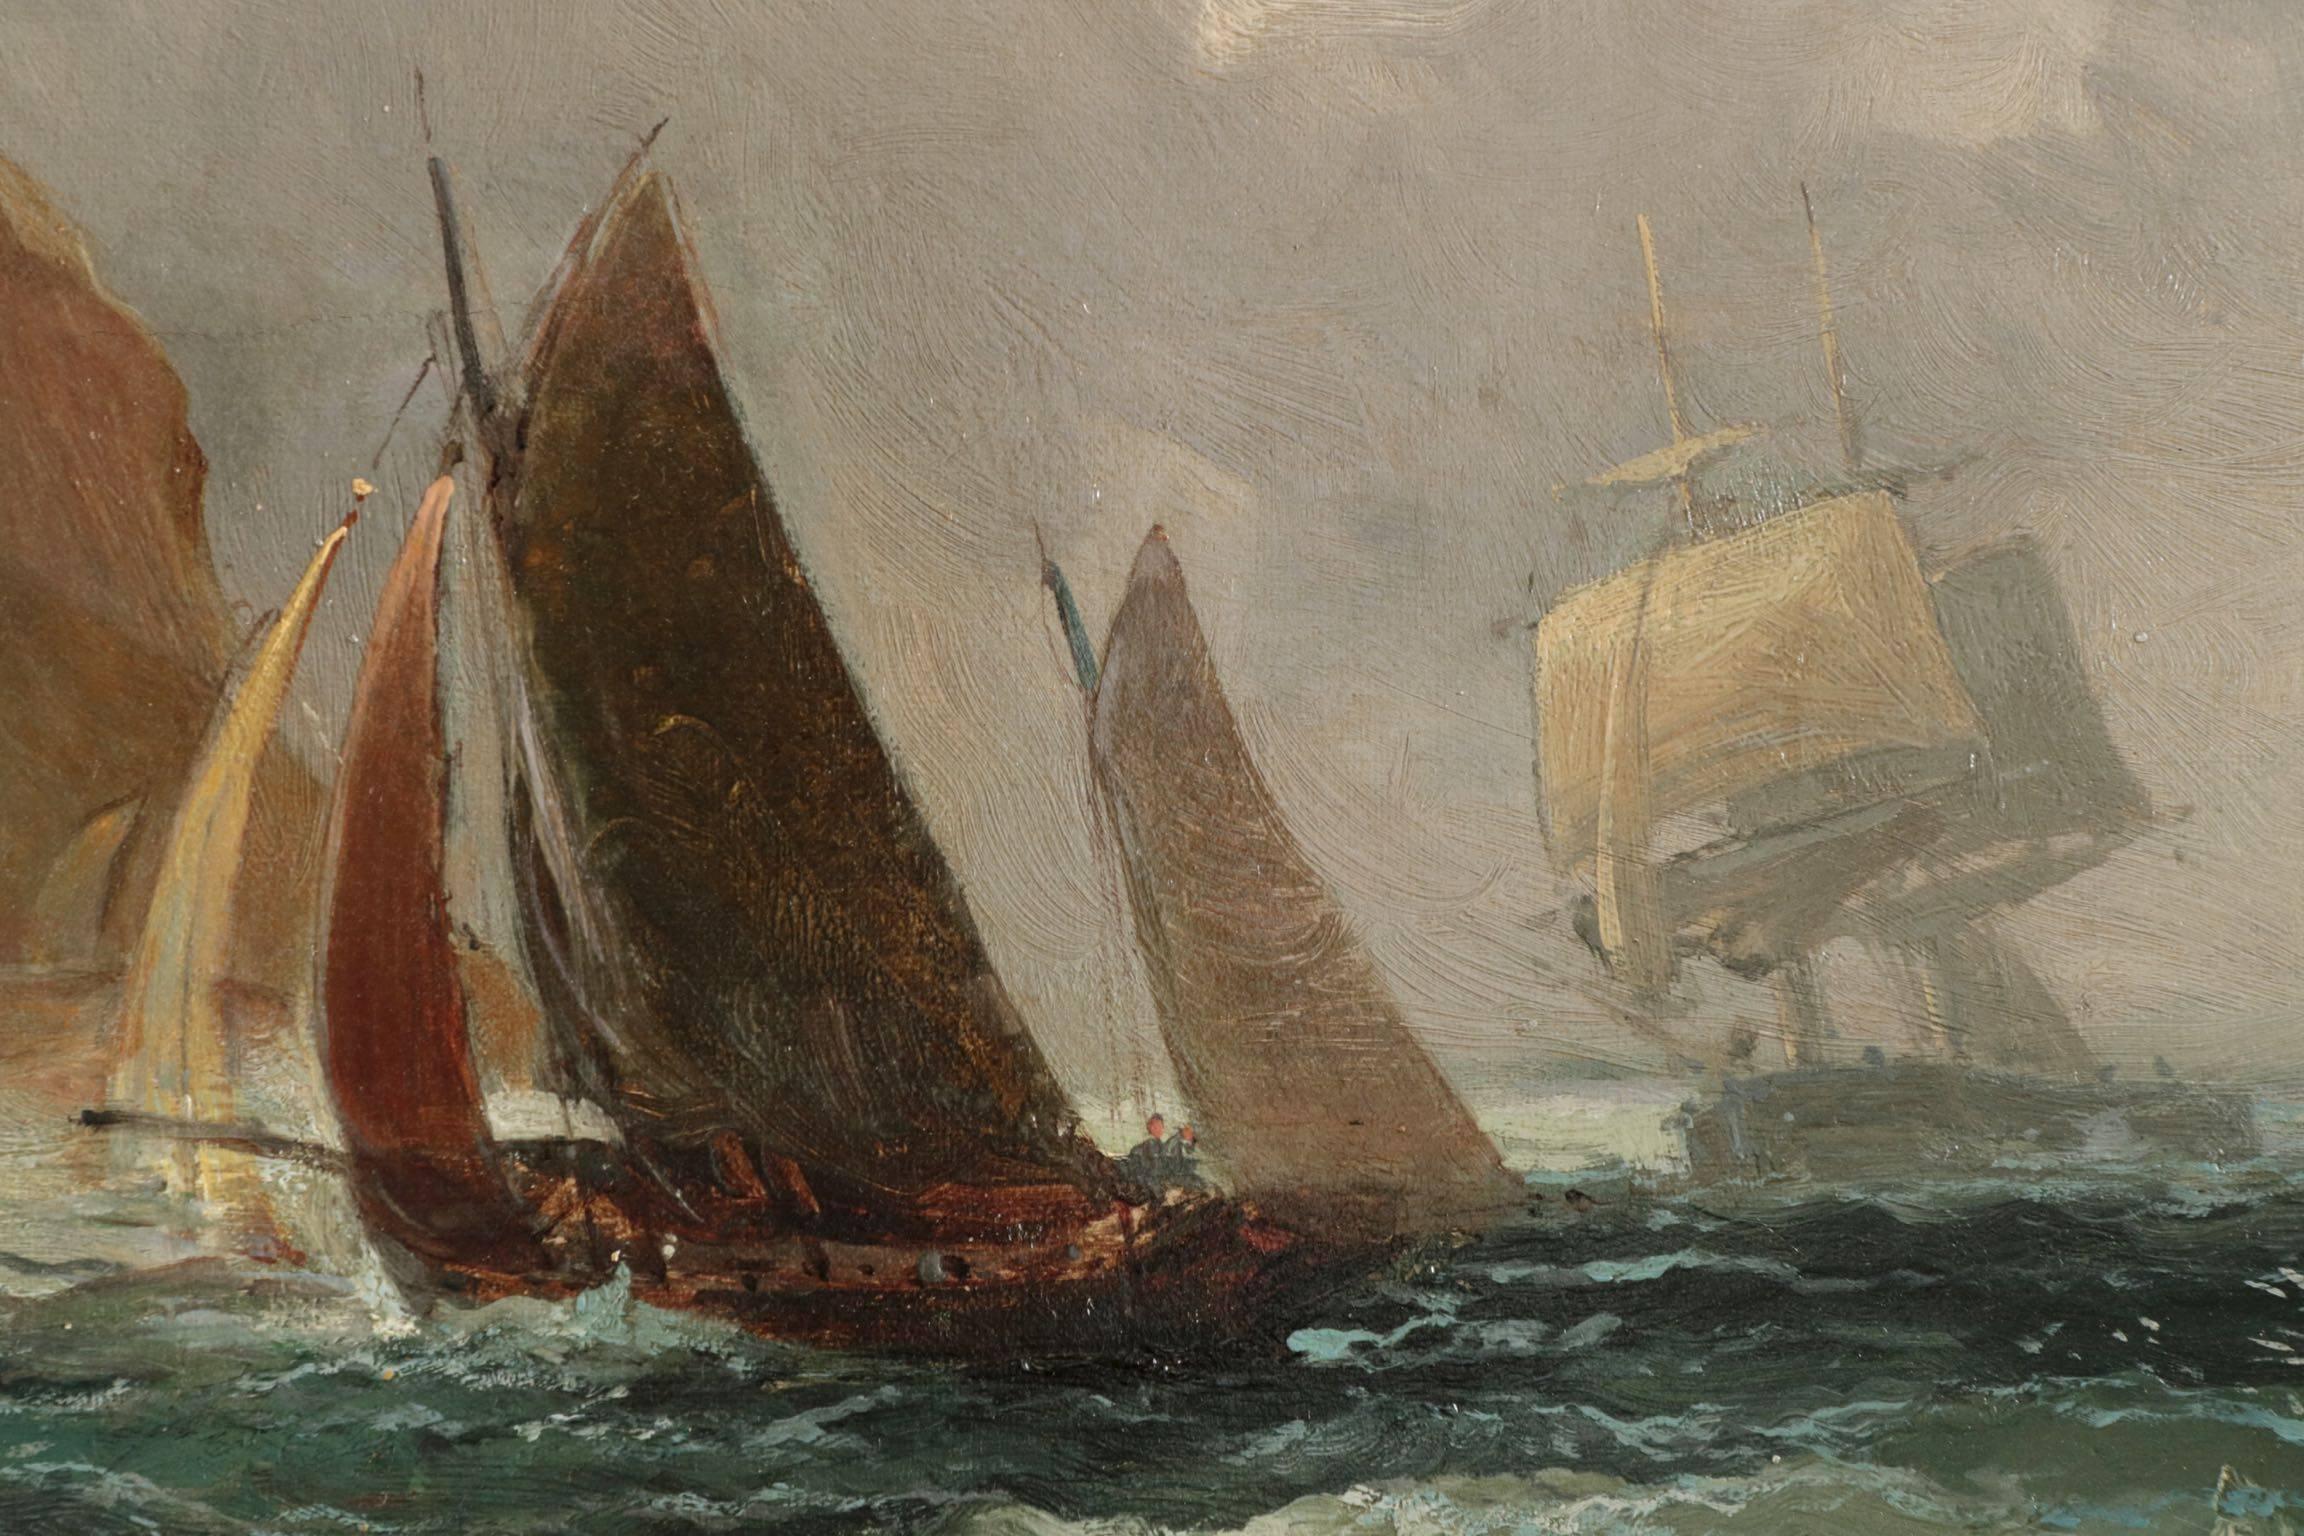 Hand-Painted British Seascape Painting of Ships off Coast by Robert Ernest Roe